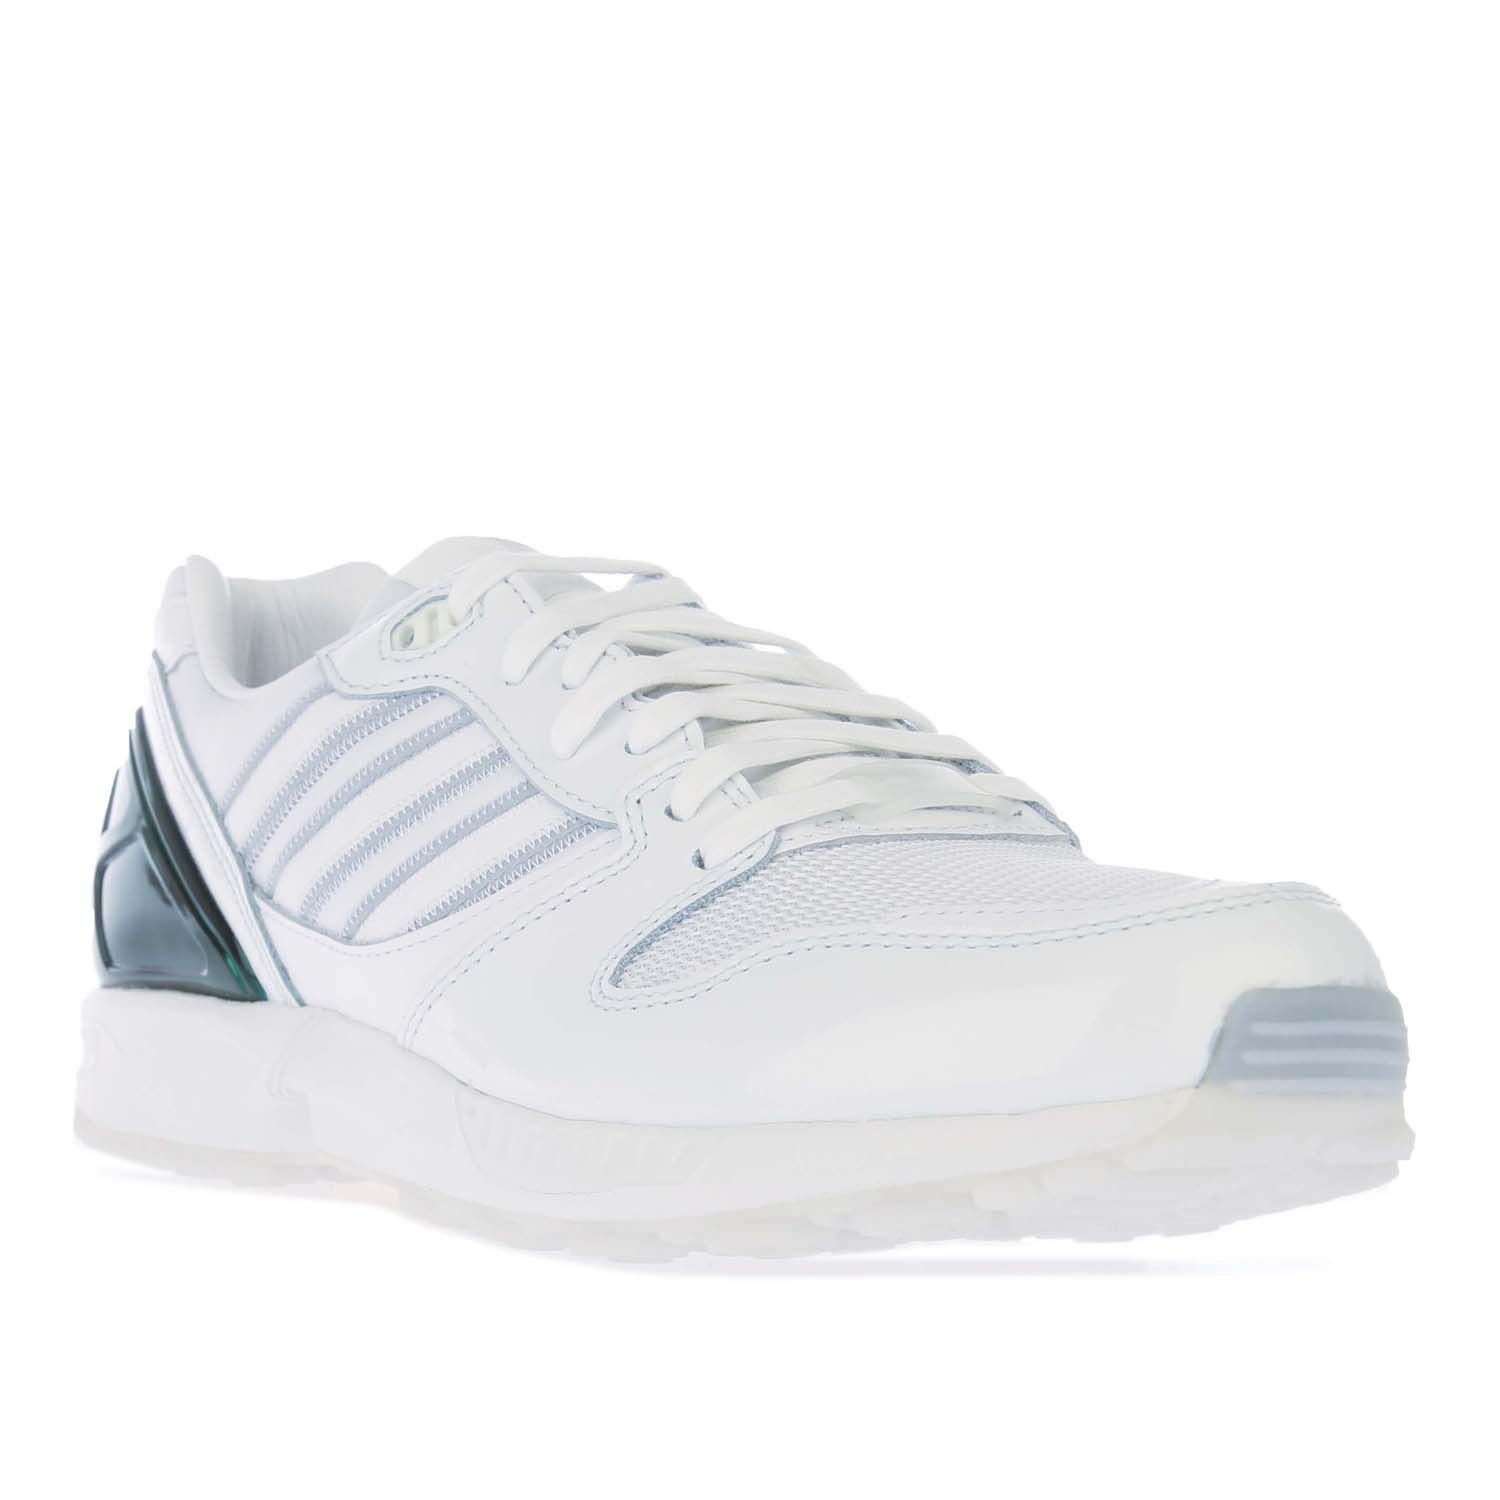 Mens adidas Originals ZX 5000 University of Miami ( The U ) Trainers in white.- Leather upper.- Lace up fastening.- Designed in orange  green and white to represent the legacy of the Miami Hurricanes.- Rubber sole.- Leather upper and Leather lining.- Ref.: FZ4416